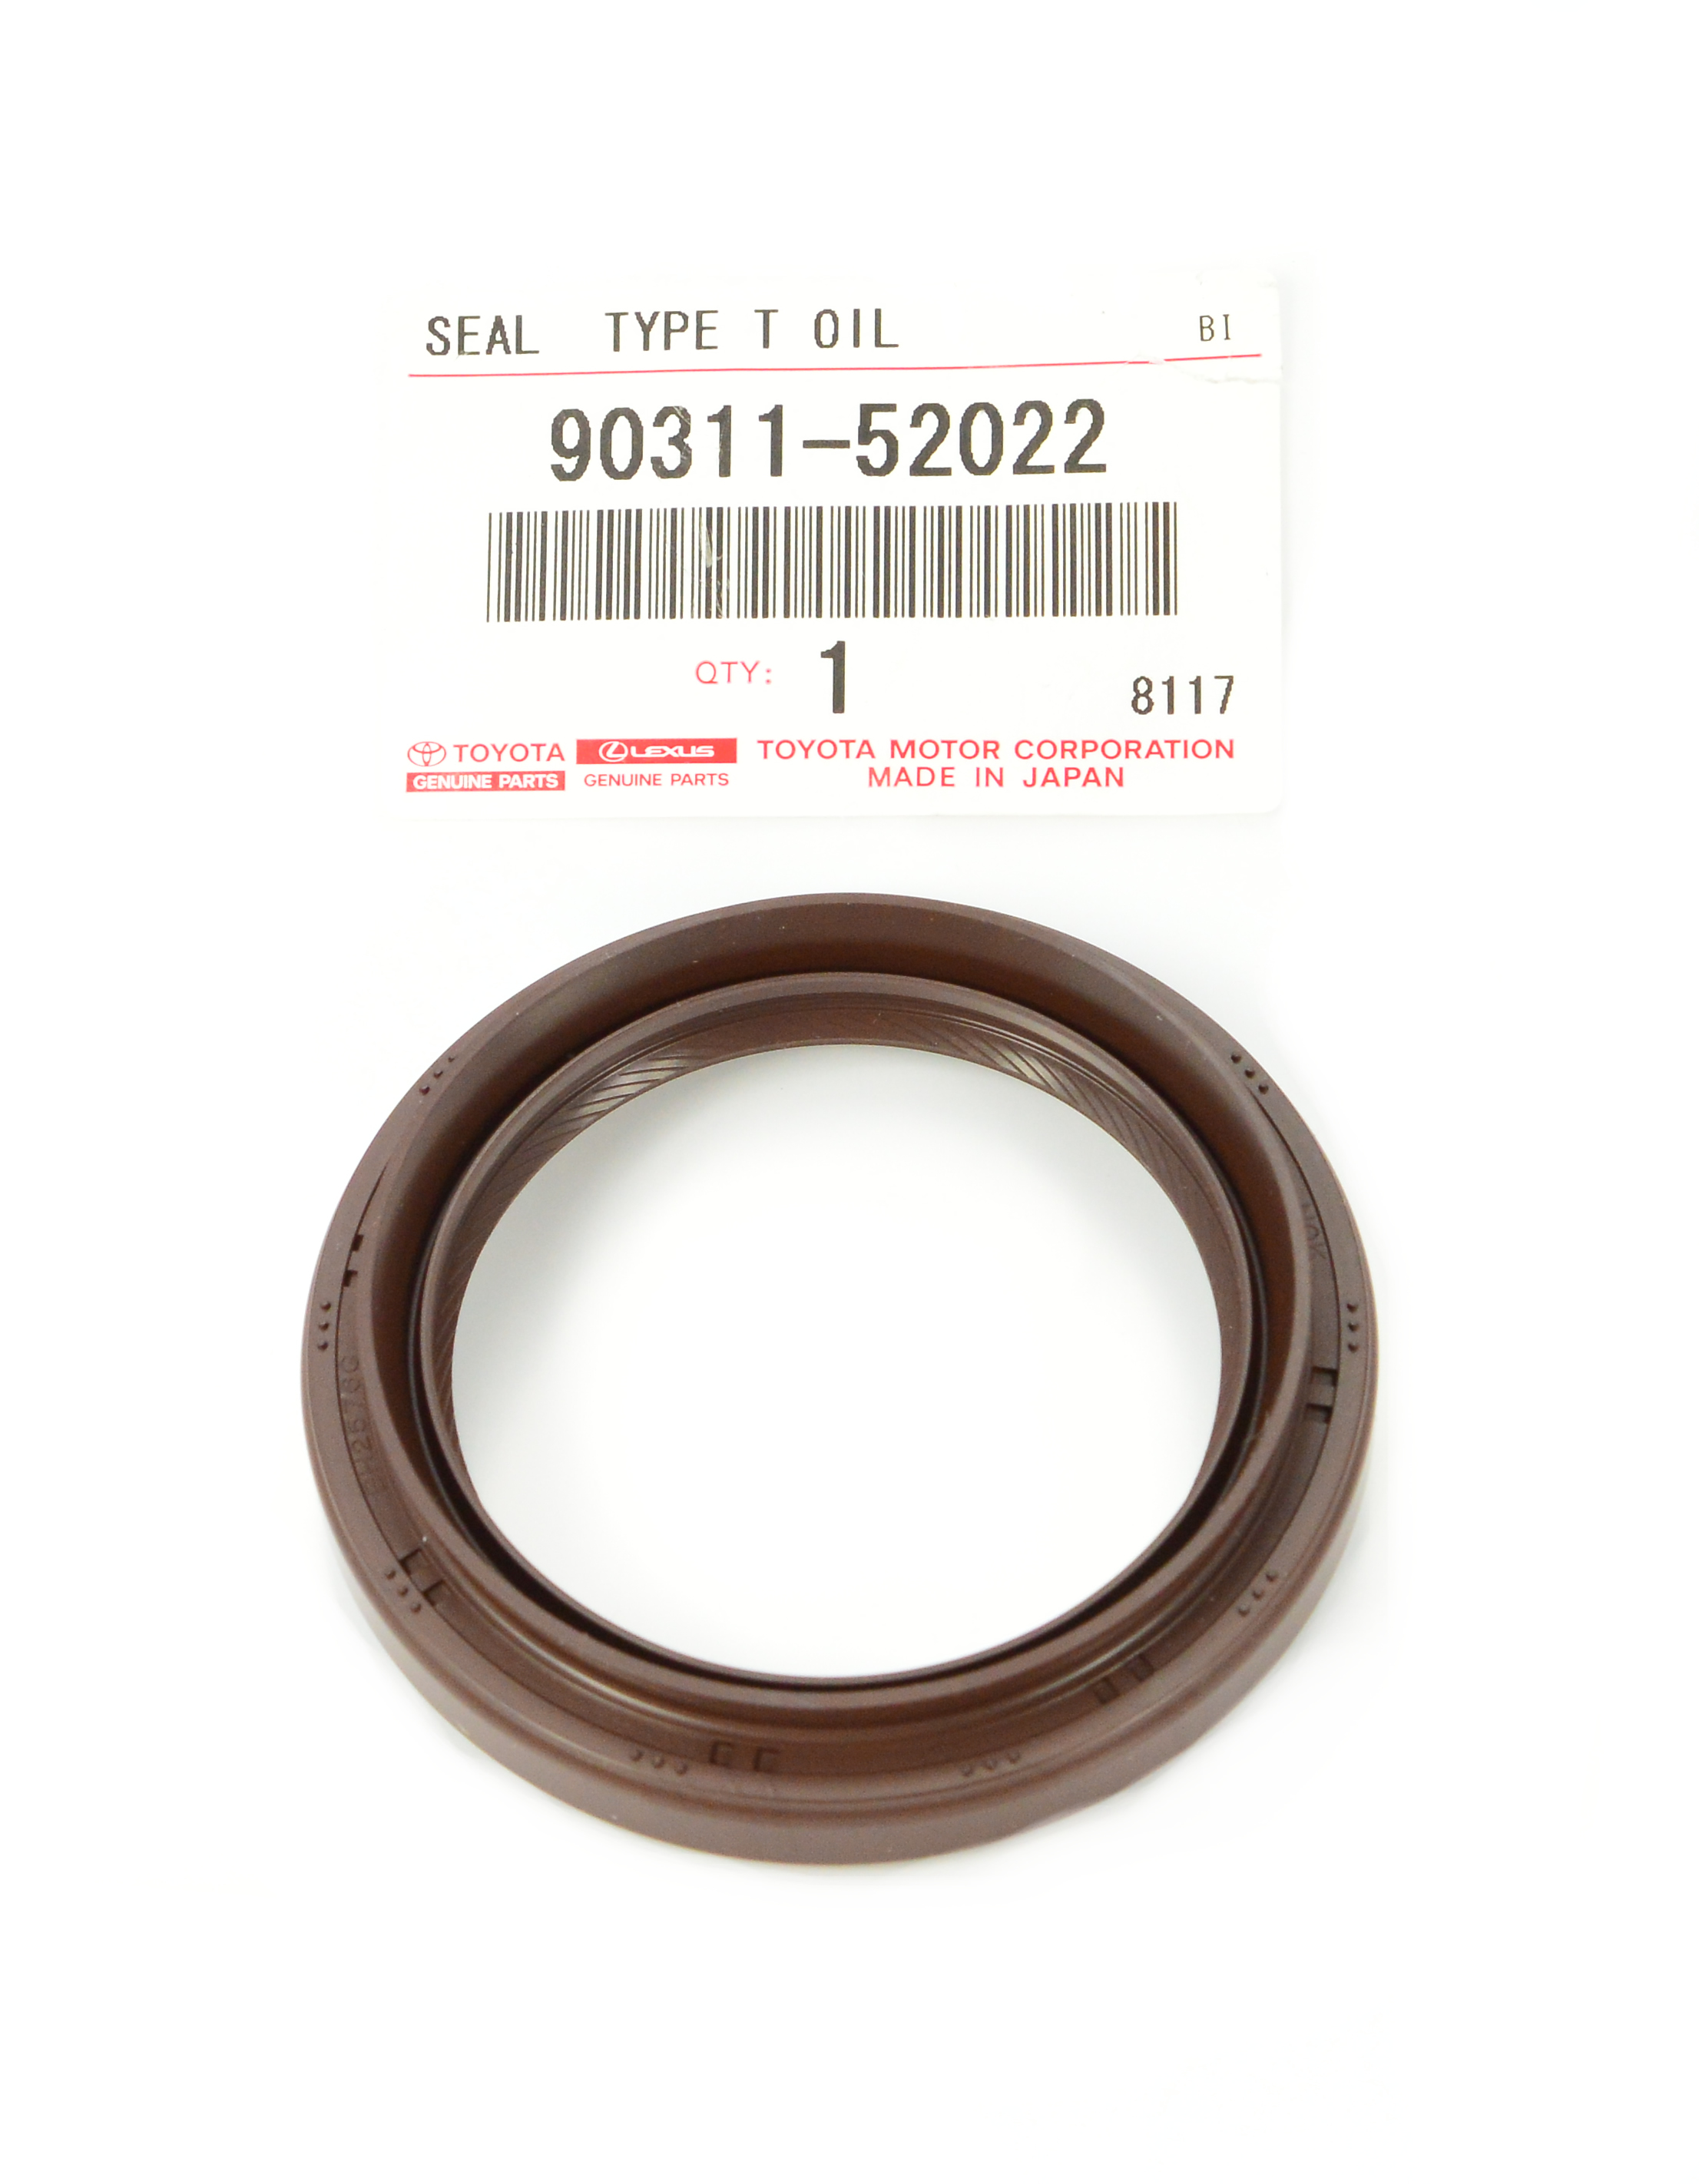 height, model Rotary shaft oil seal 42 x 66 x pack